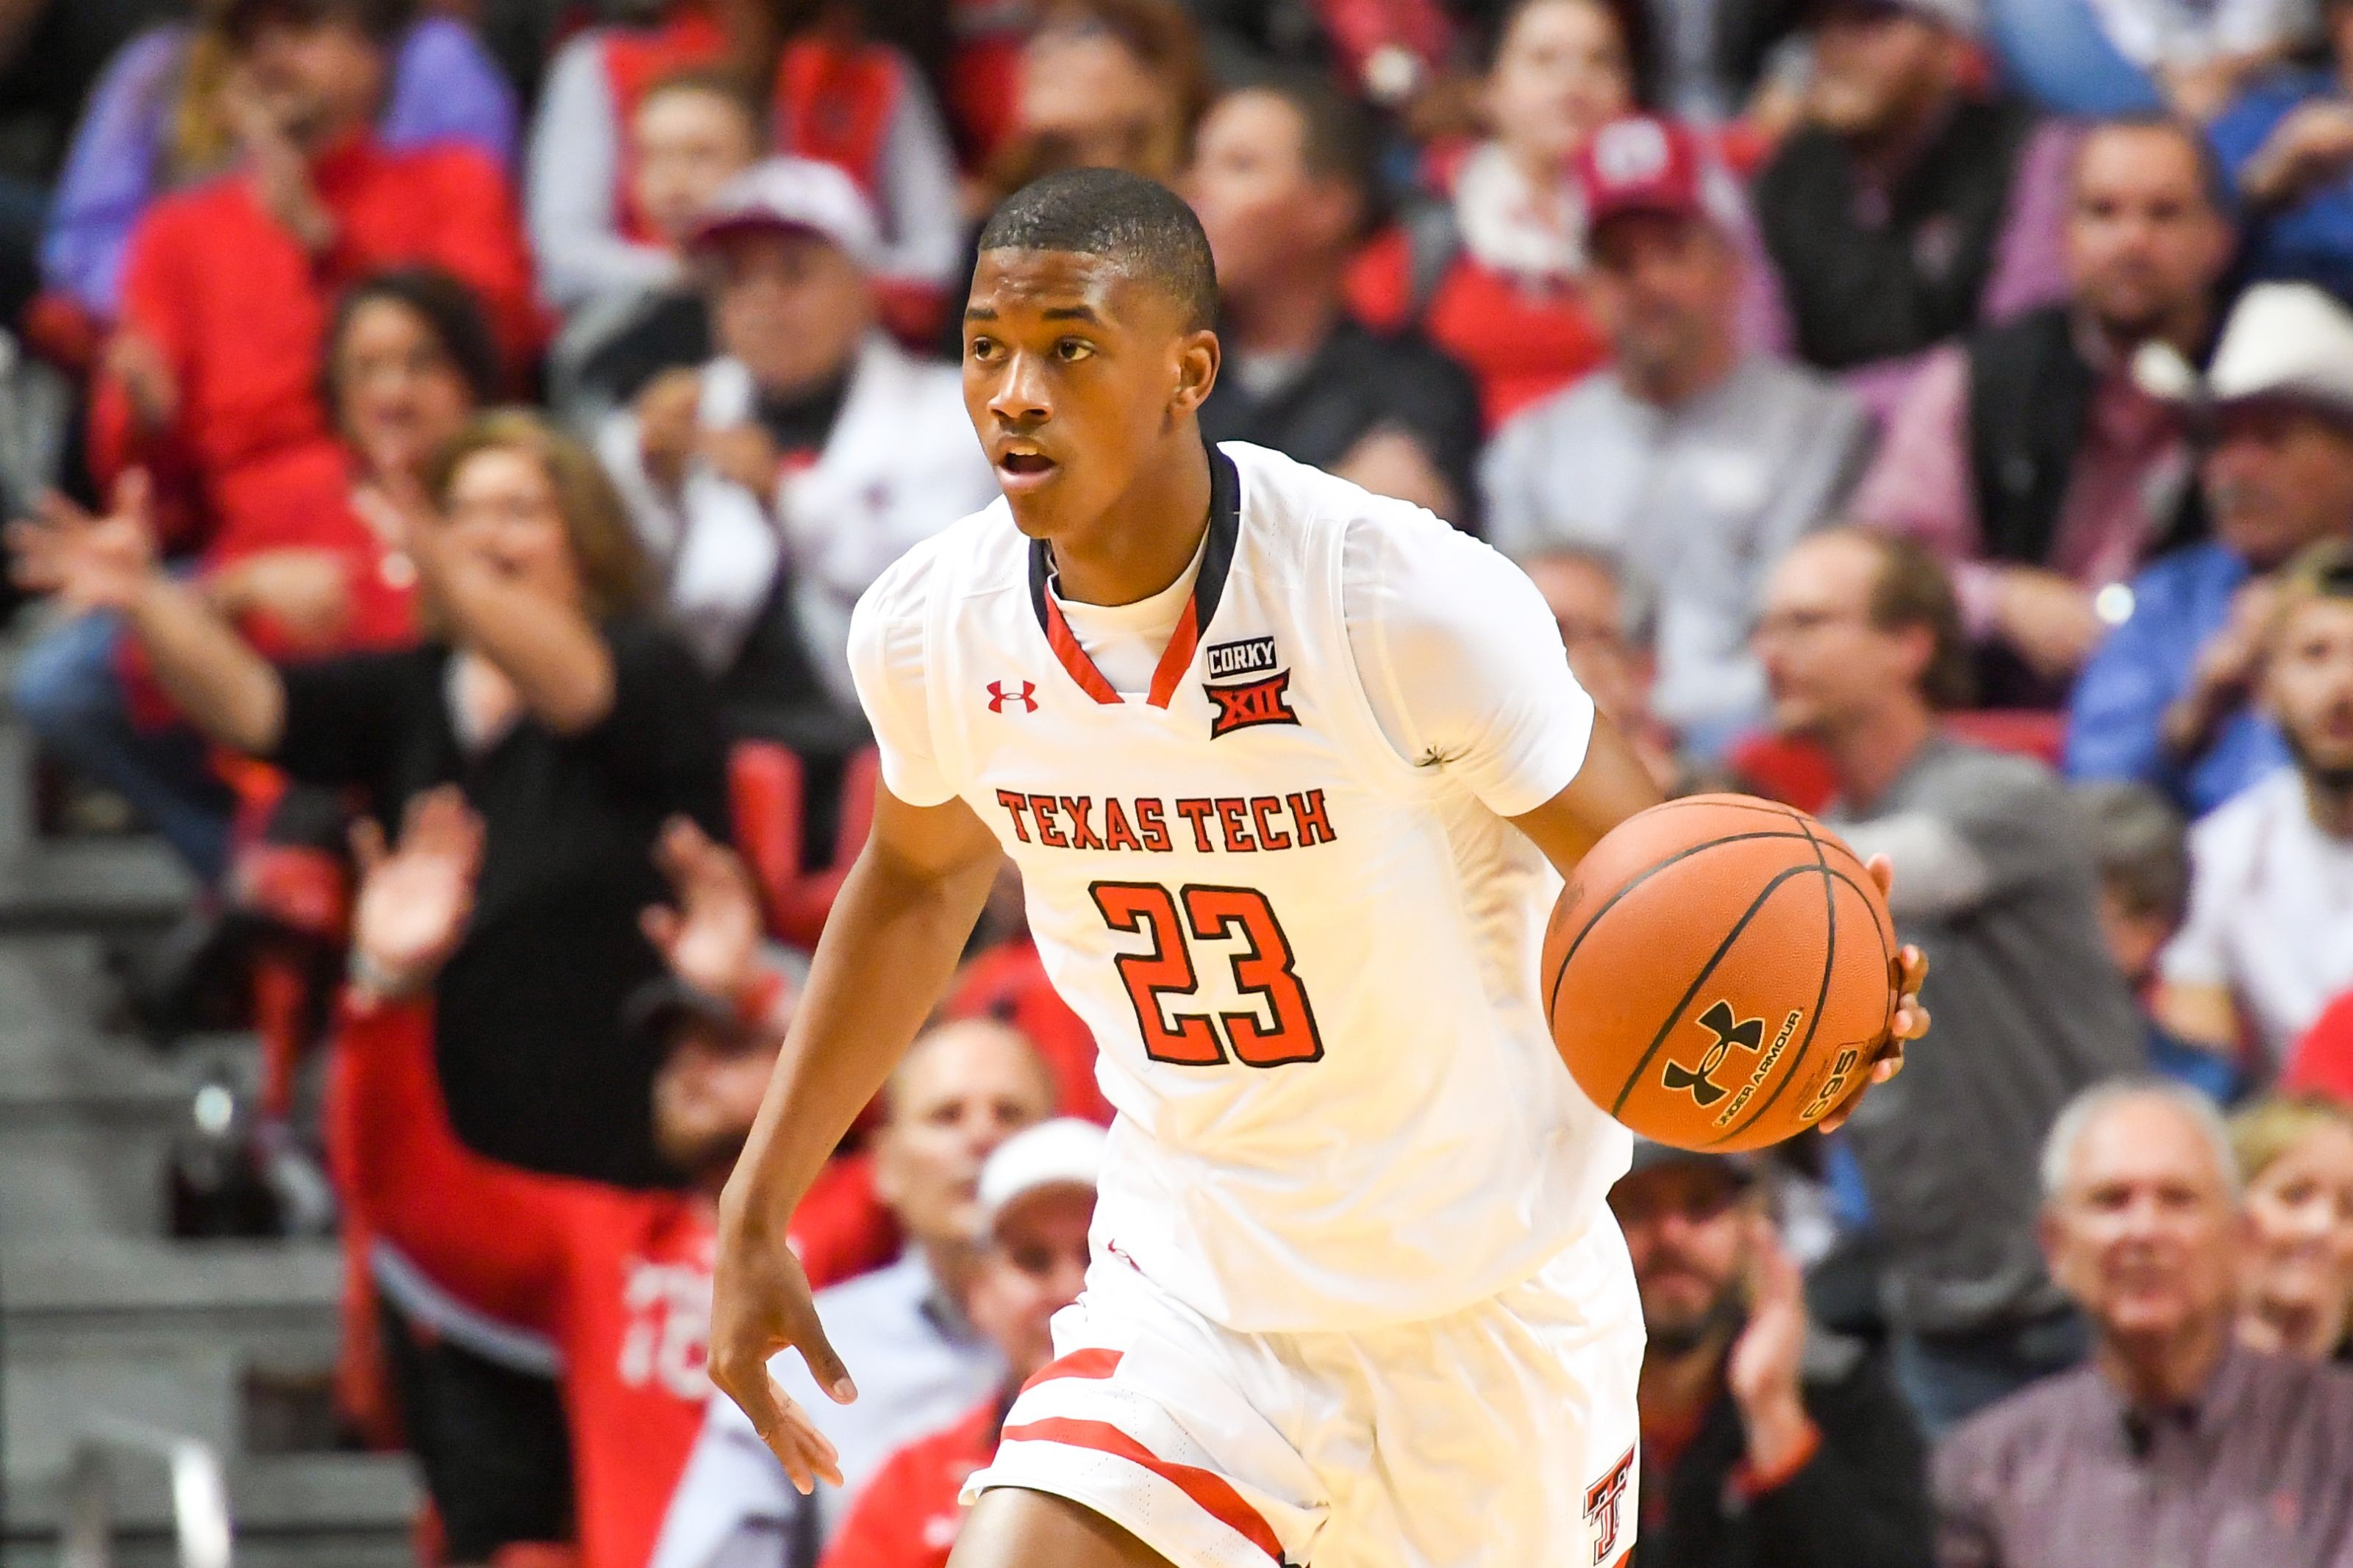 Texas Tech basketball: 5 players to know from the West Region